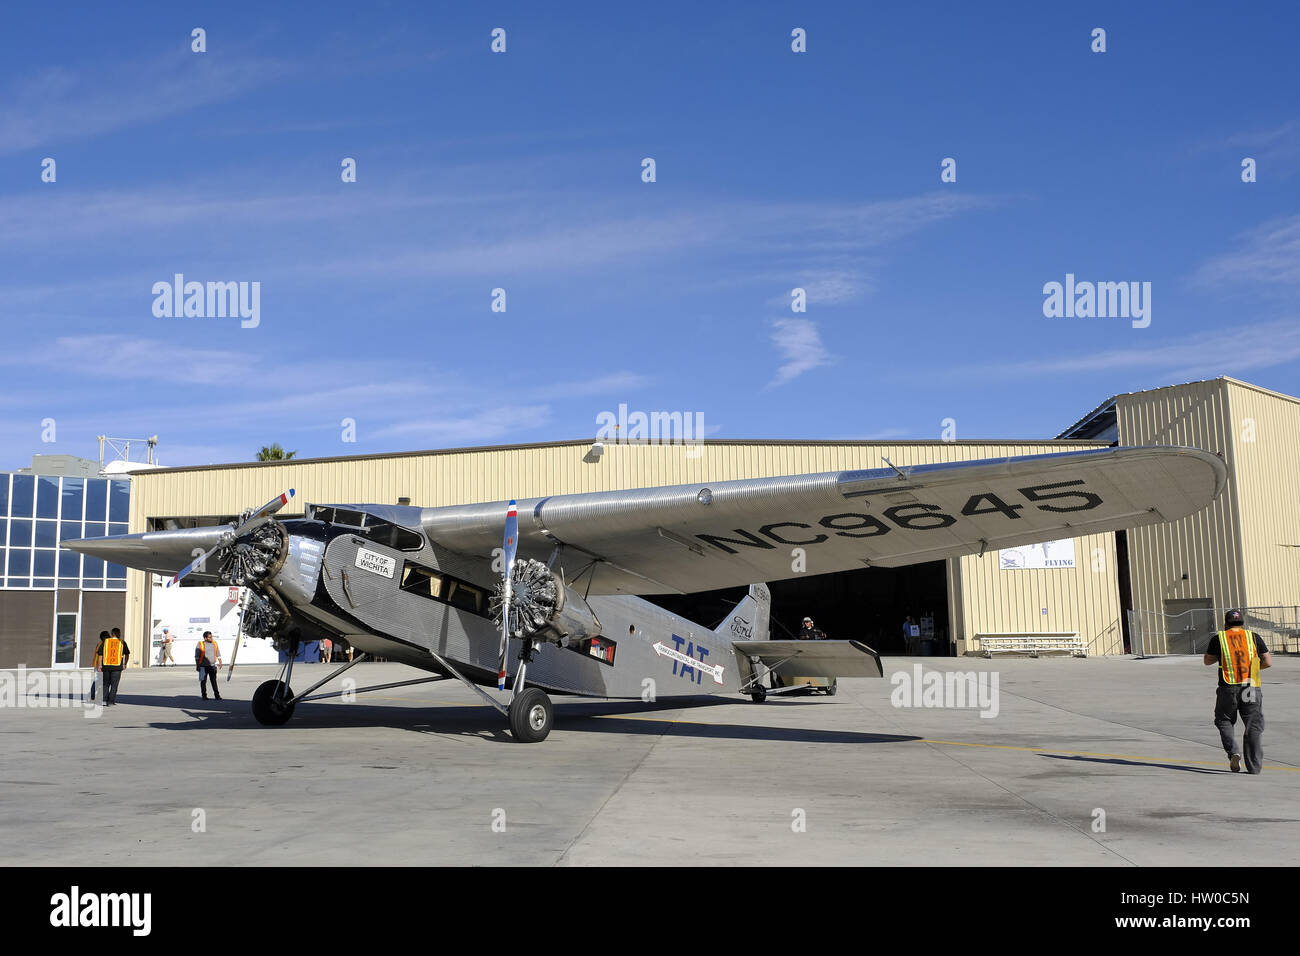 Palm Springs, CA, USA. 11th Mar, 2017. One of the very first passenger aircraft, a 1928 Ford TriMotor arrives at the Palm Springs Air Museum. Credit: Ian L. Sitren/ZUMA Wire/Alamy Live News Stock Photo